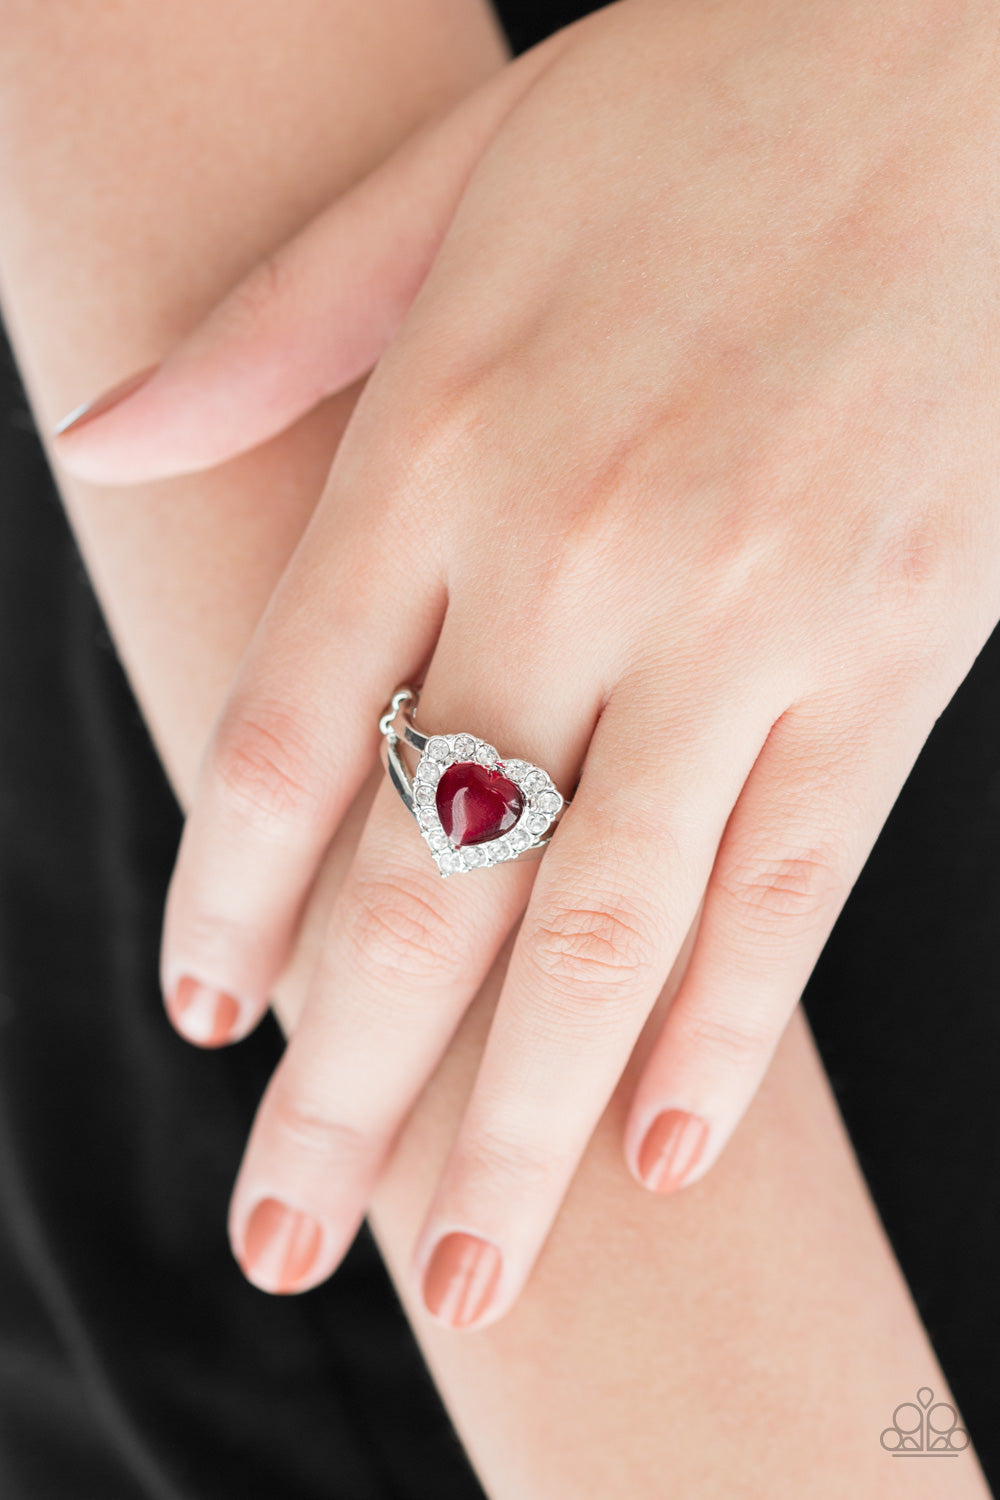 Paparazzi Love Is In The Air - Red Moonstone - White Rhinestones - Heart Ring - $5 Jewelry With Ashley Swint